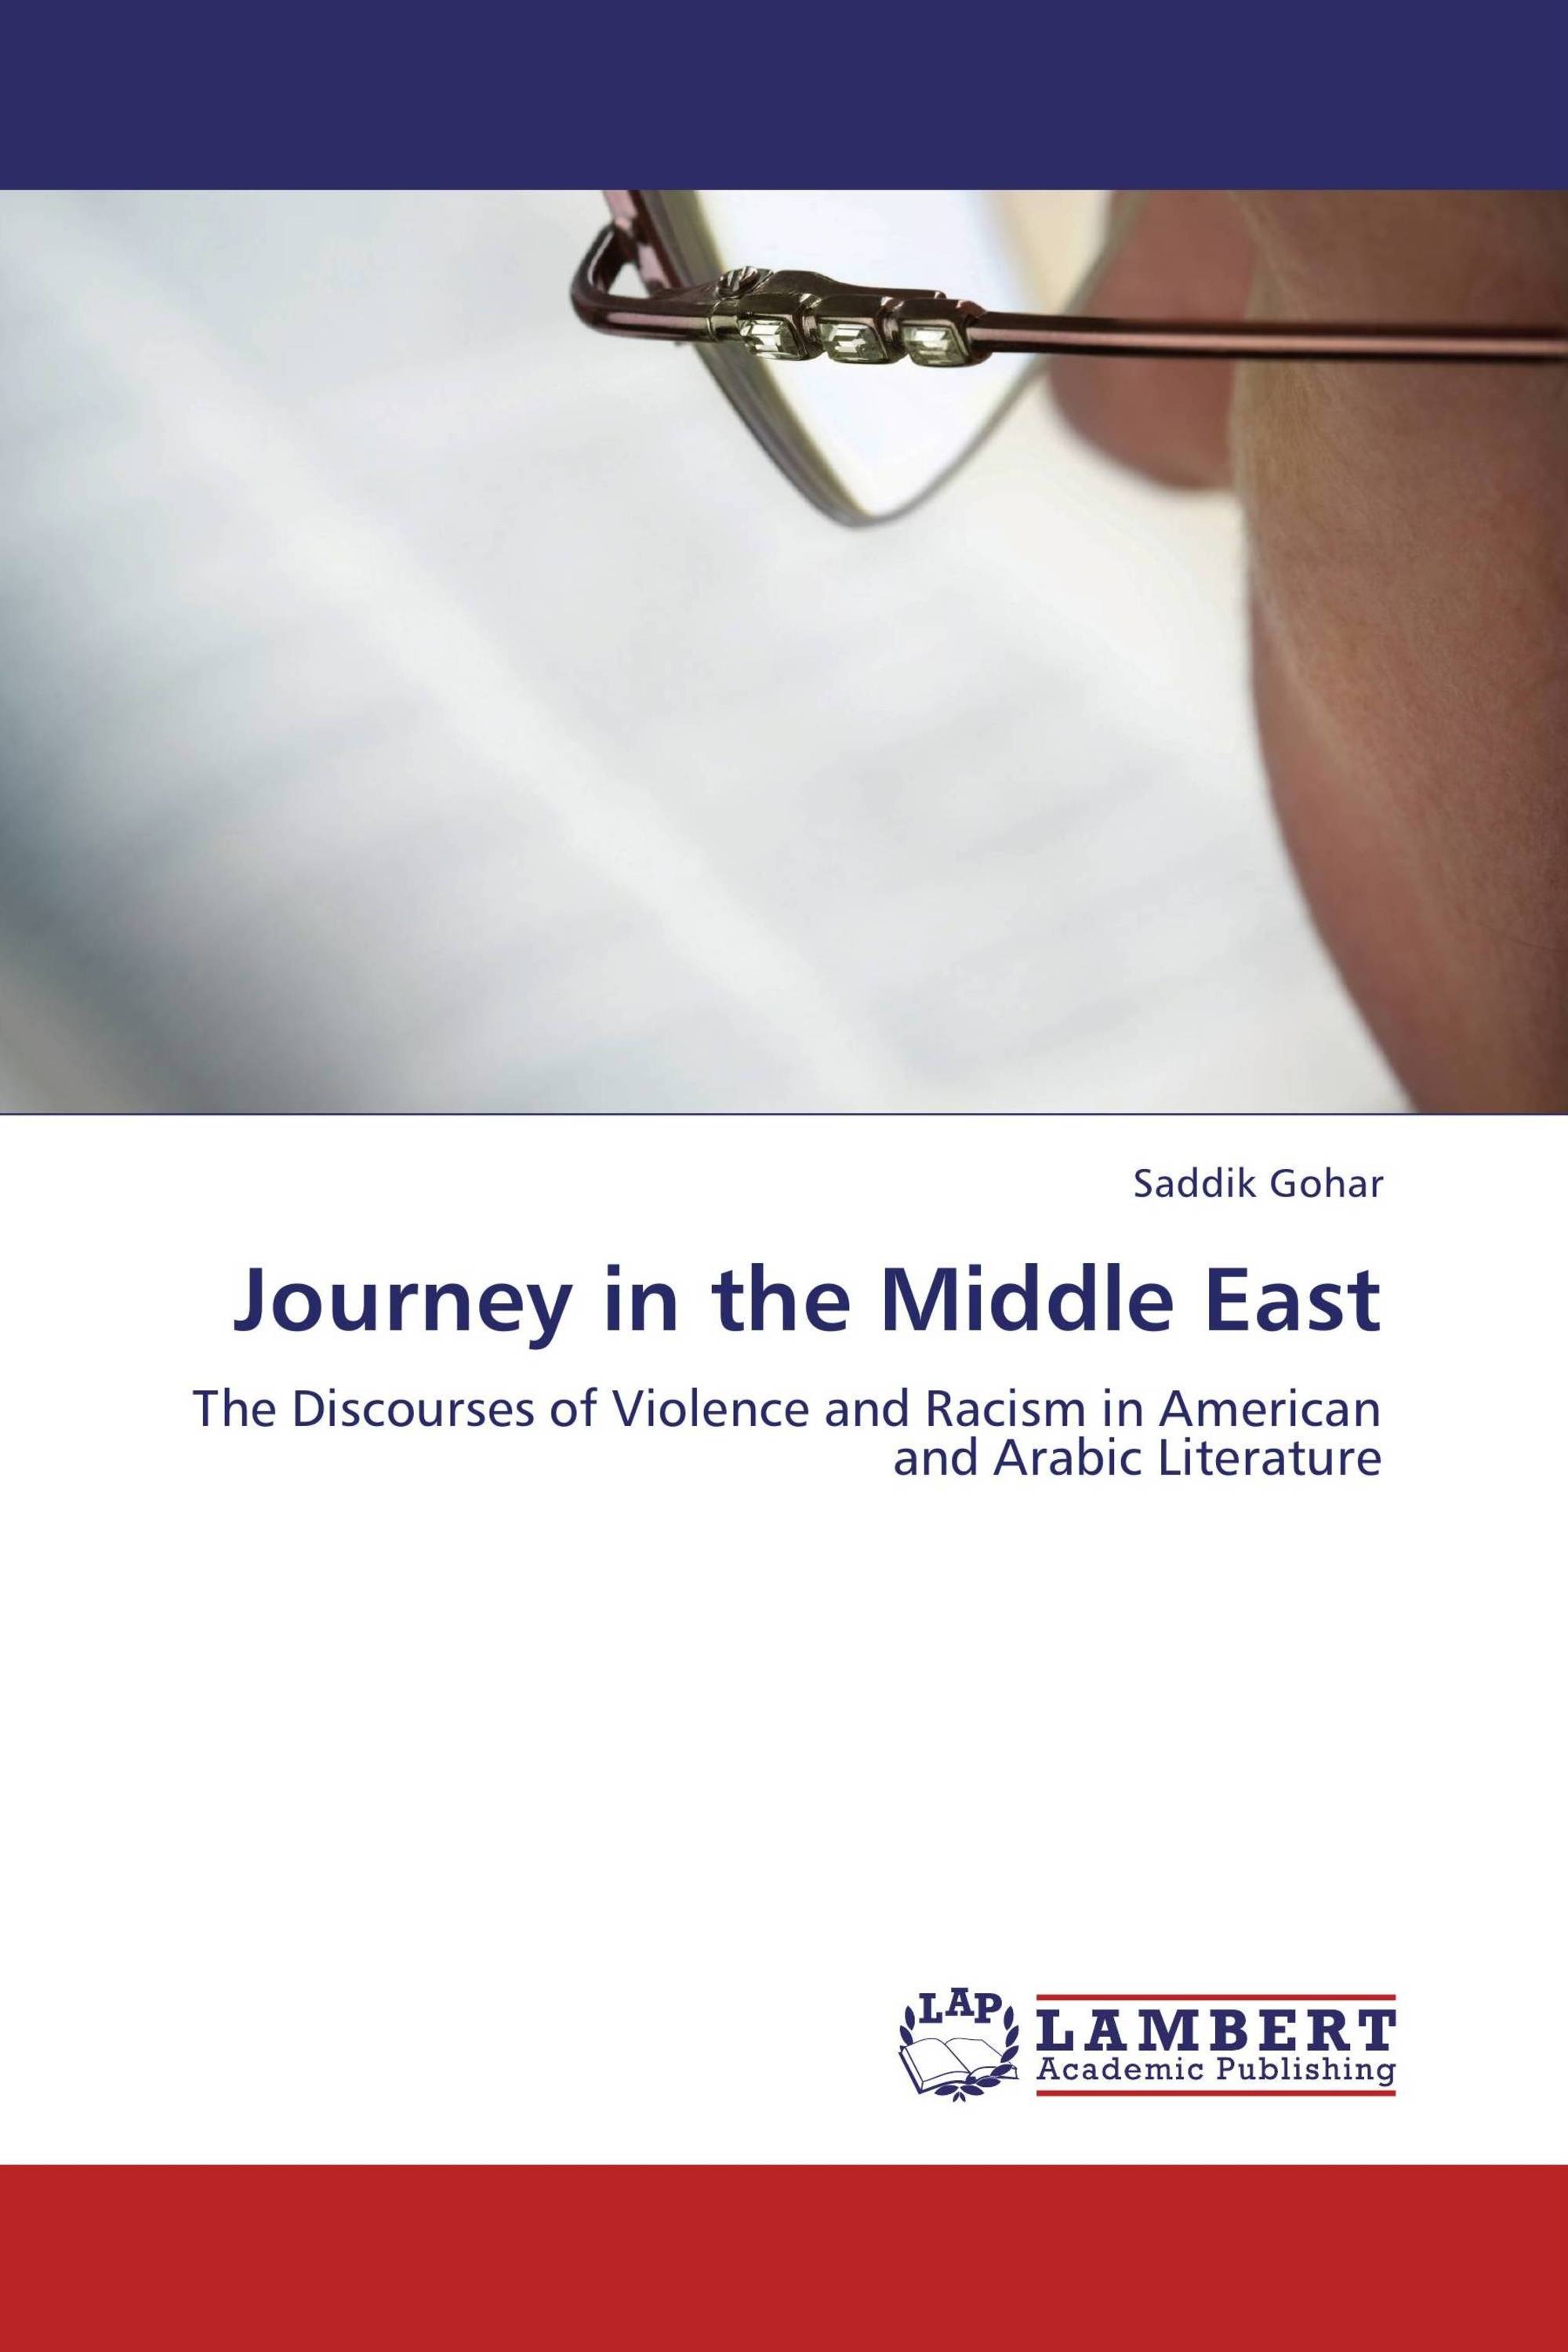 middle east book a trip